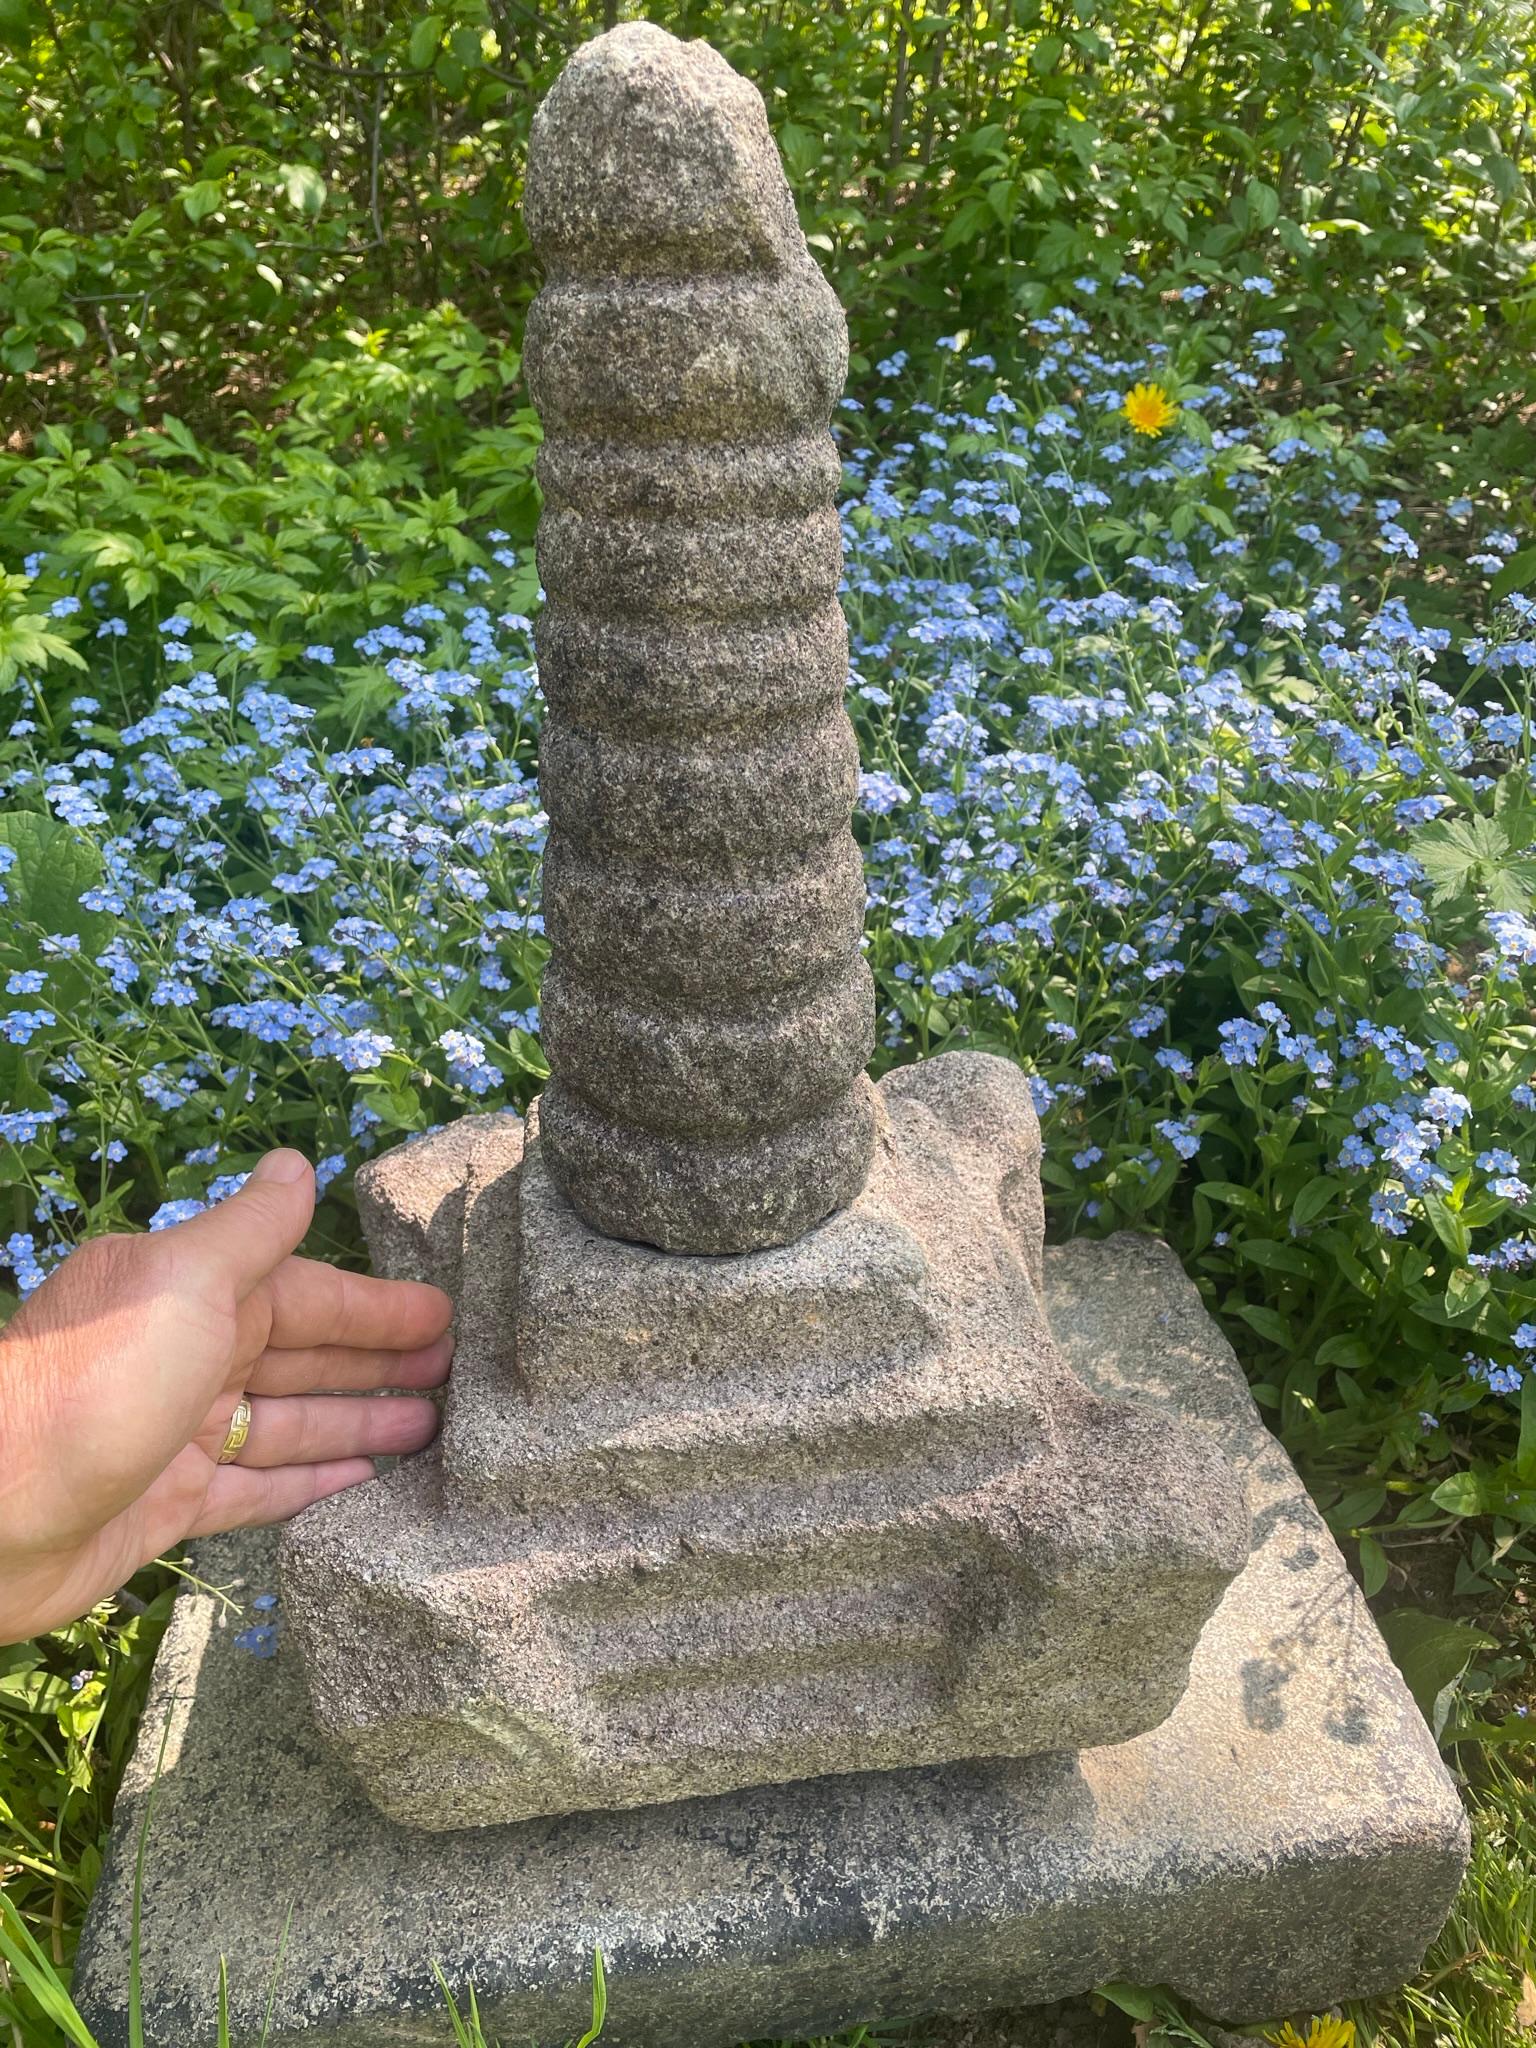 Wouldn't this look great in your garden or shrine setting ?

Japan early four step stone pagoda 